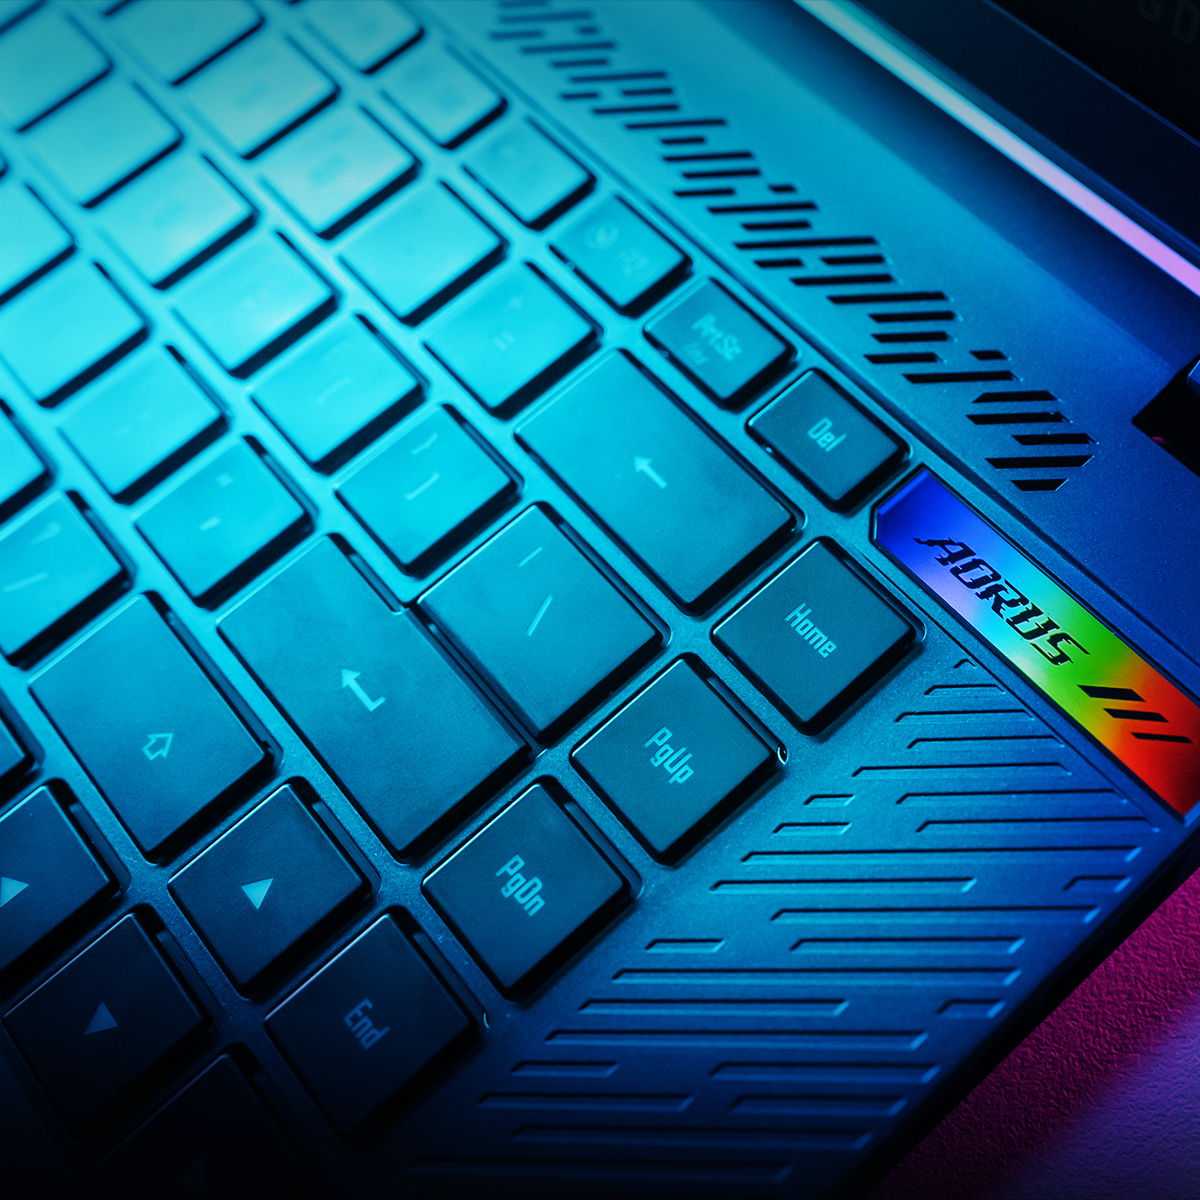 Check out the AORUS 16X AI Gaming Laptop.  Feature packed 16 inch laptop with a 91% screen-to-body ratio, 165Hz display, and our new WINDFORCE Infinity cooling technology!

Learn more here:   gigabyte.com/Laptop/AORUS-1…

#AORUSNA #AORUS #Gigabyte #AORUS16X  #GamingLaptop #AI